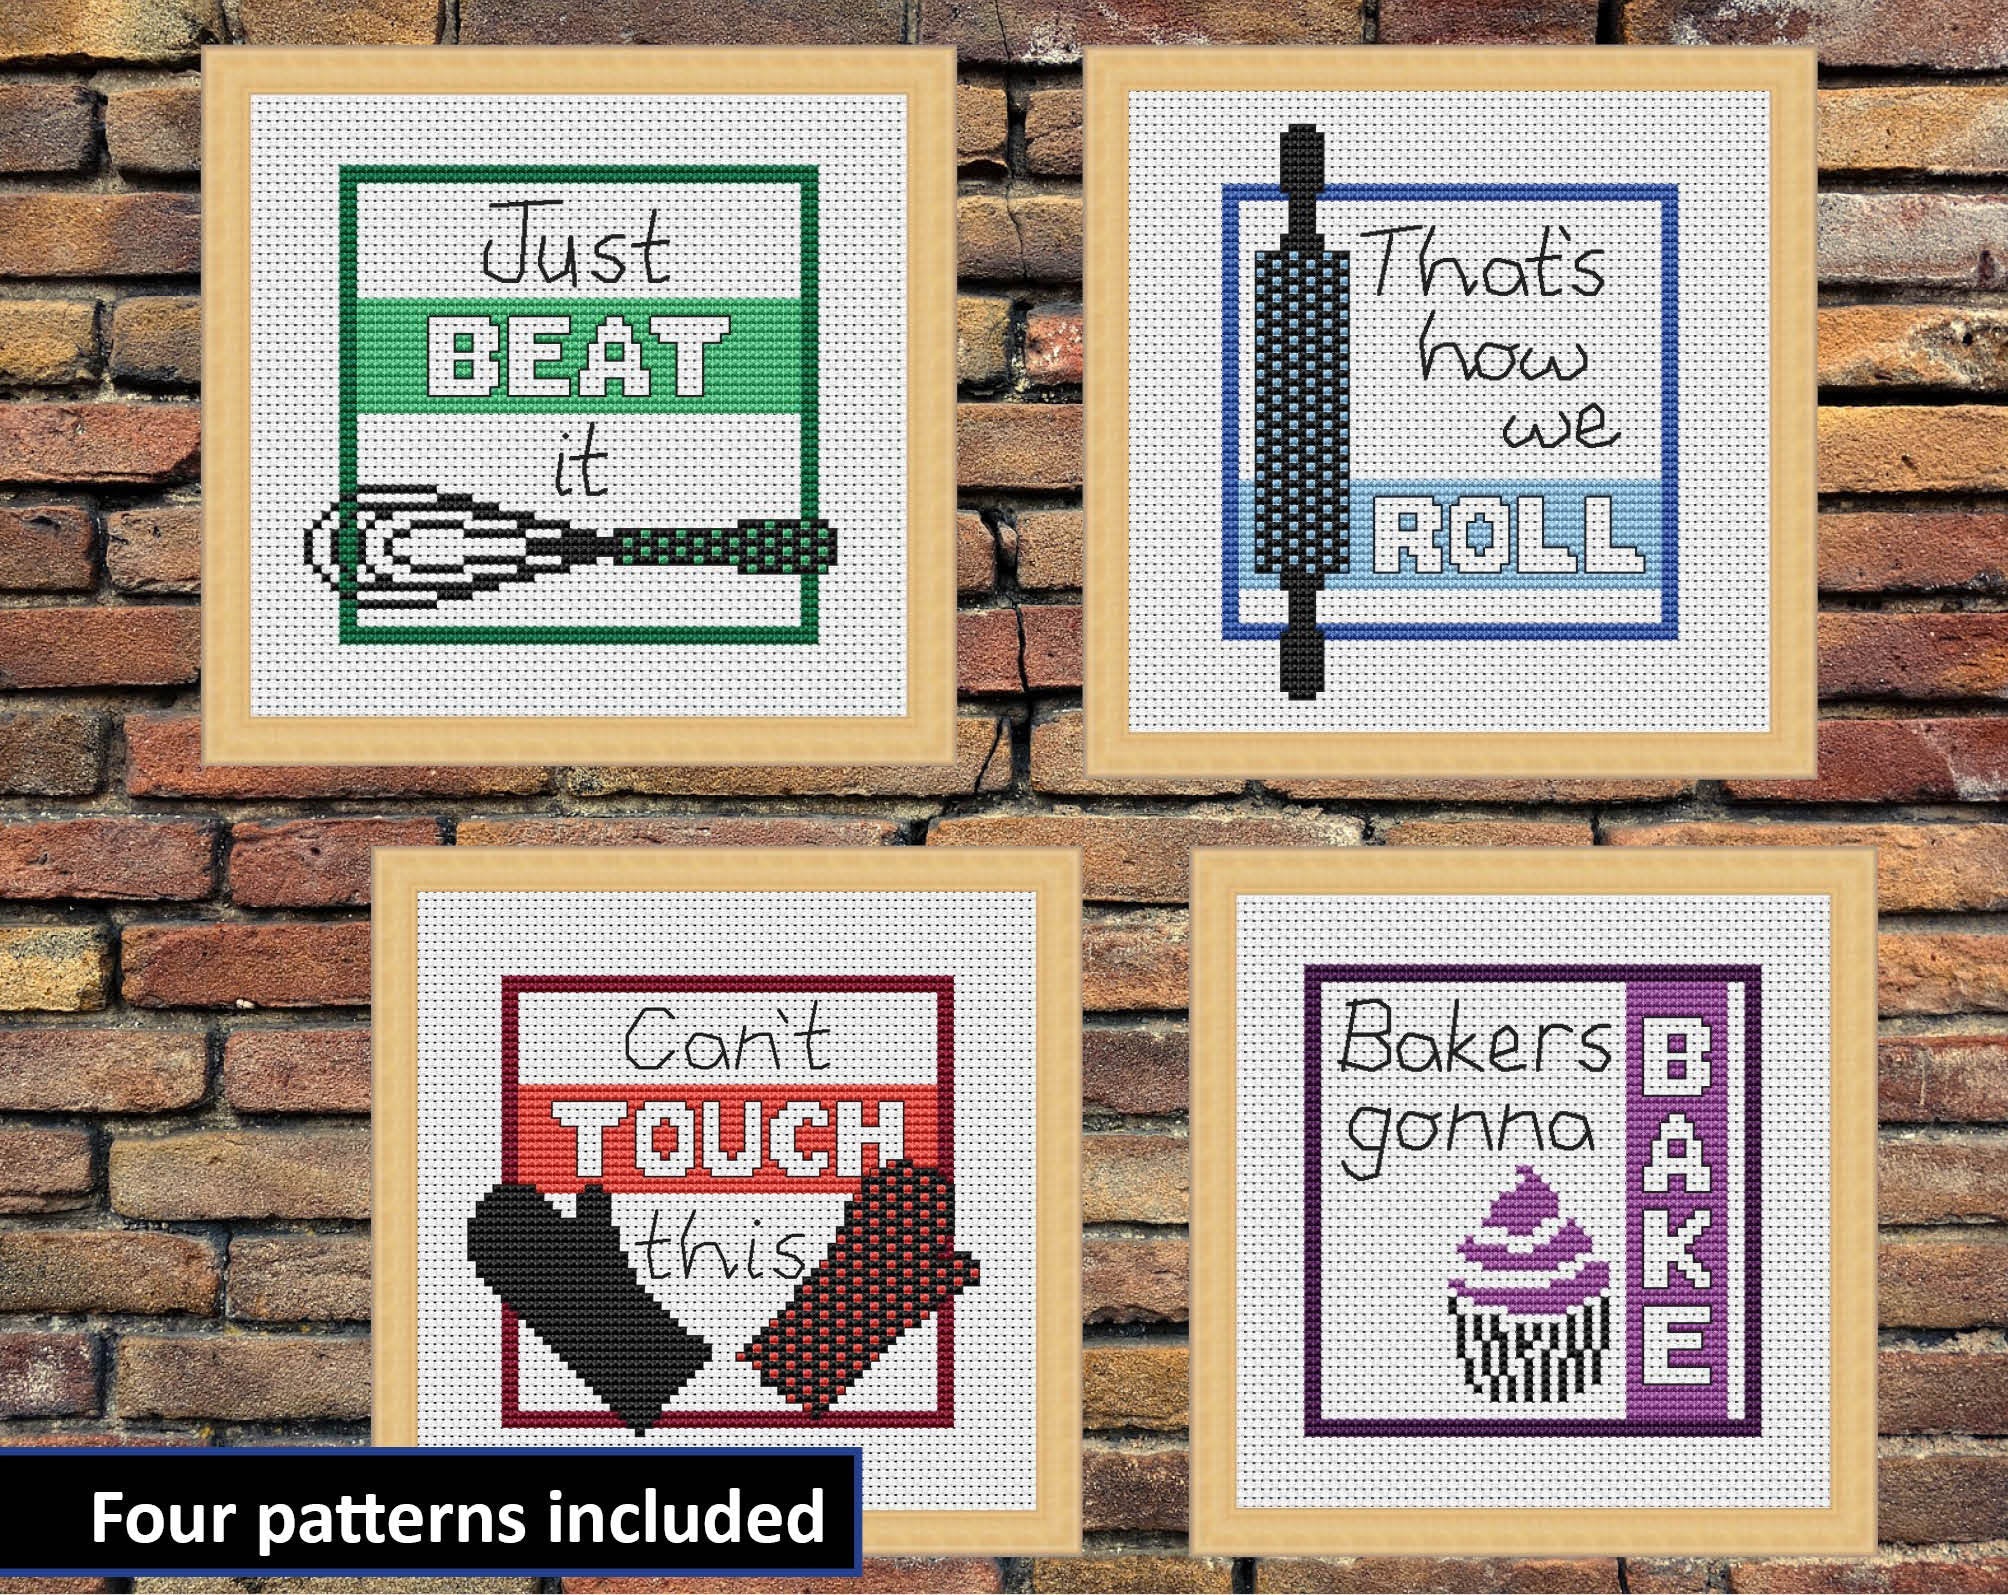 Funny kitchen quotes cross stitch patterns - "Just Beat It", "That's How We Roll", "Can't Touch This" and "Bakers Gonna Bake"